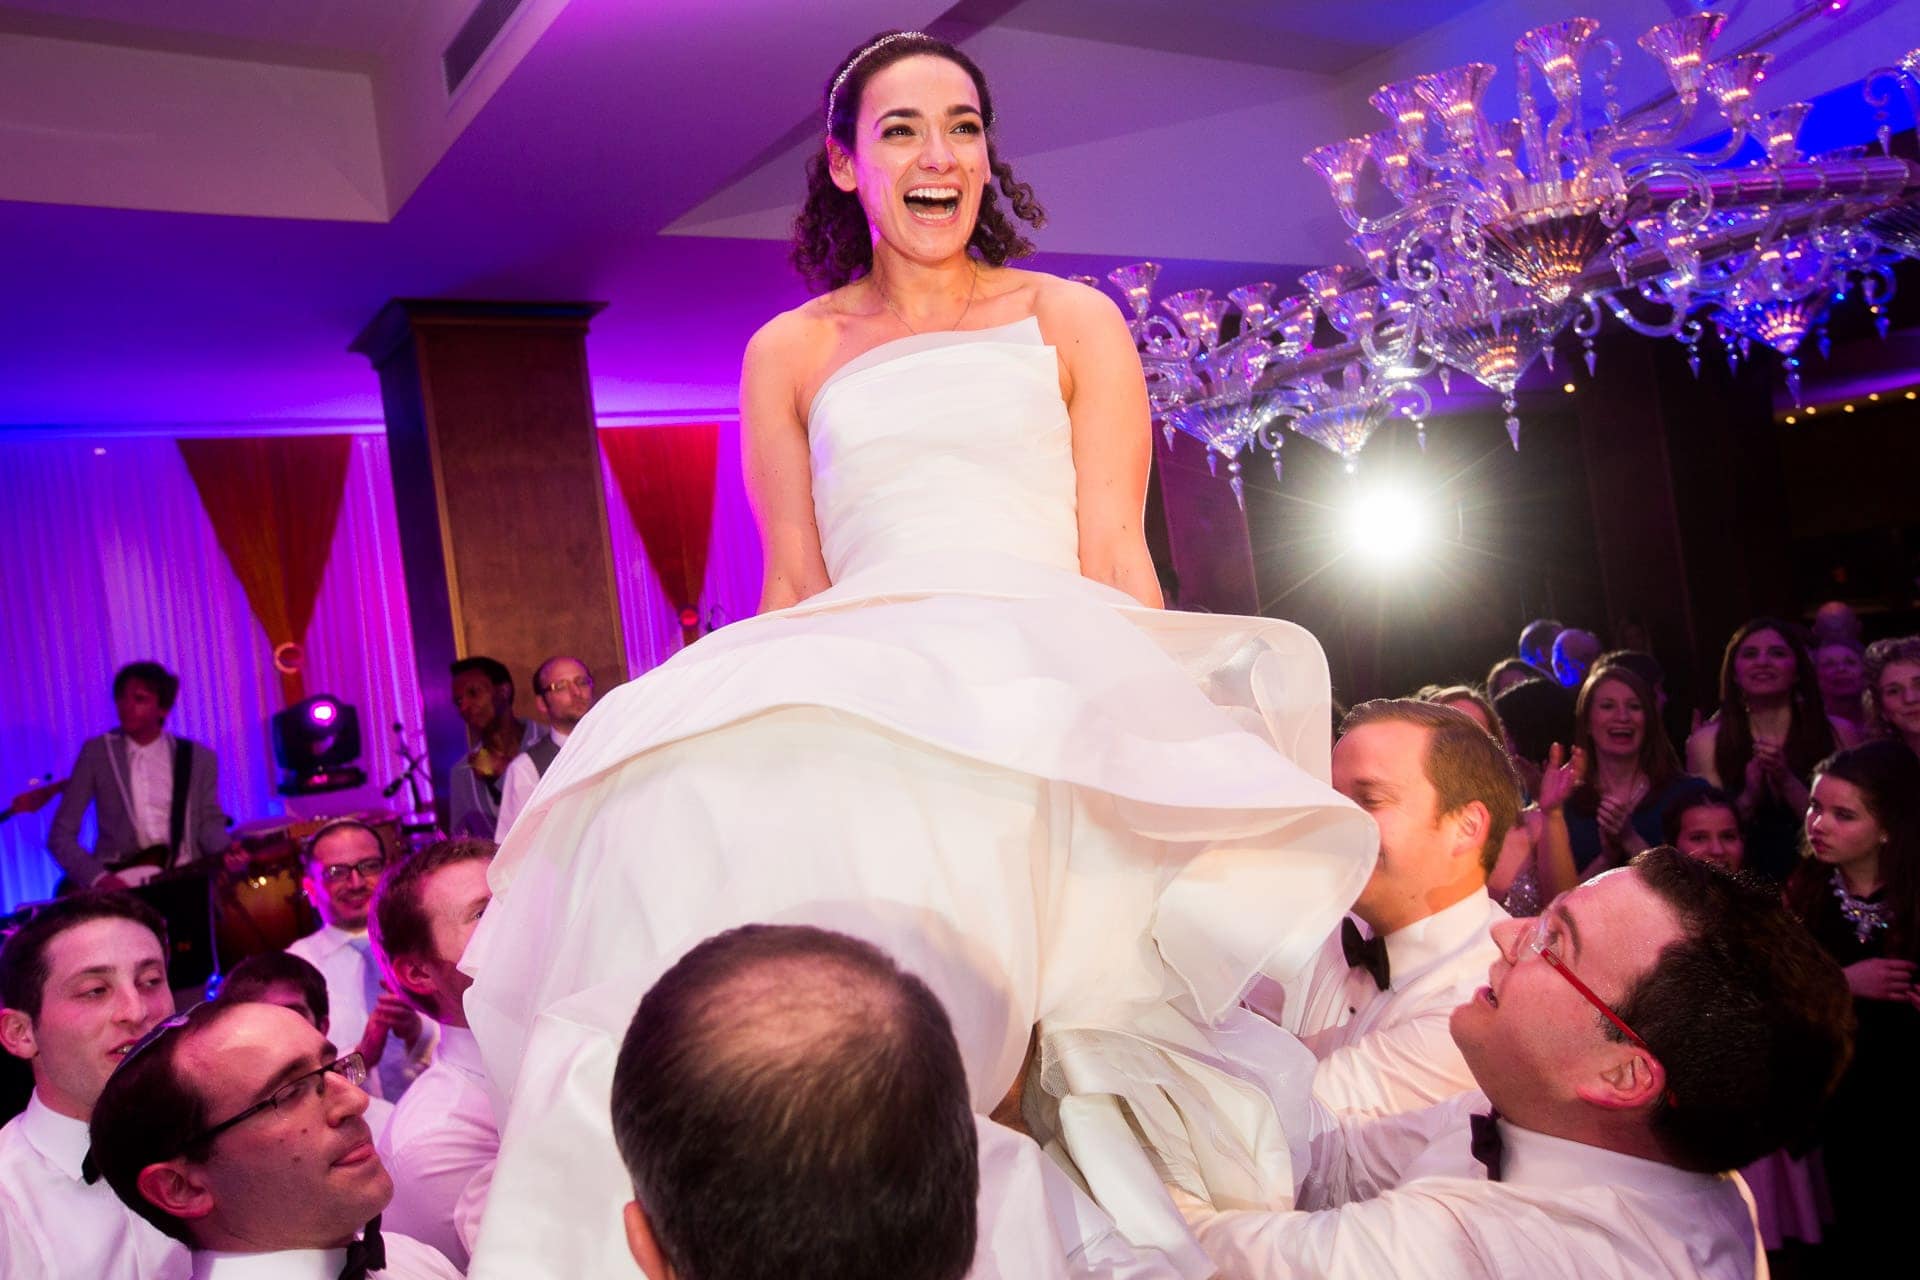 Jewish bride up on a chair